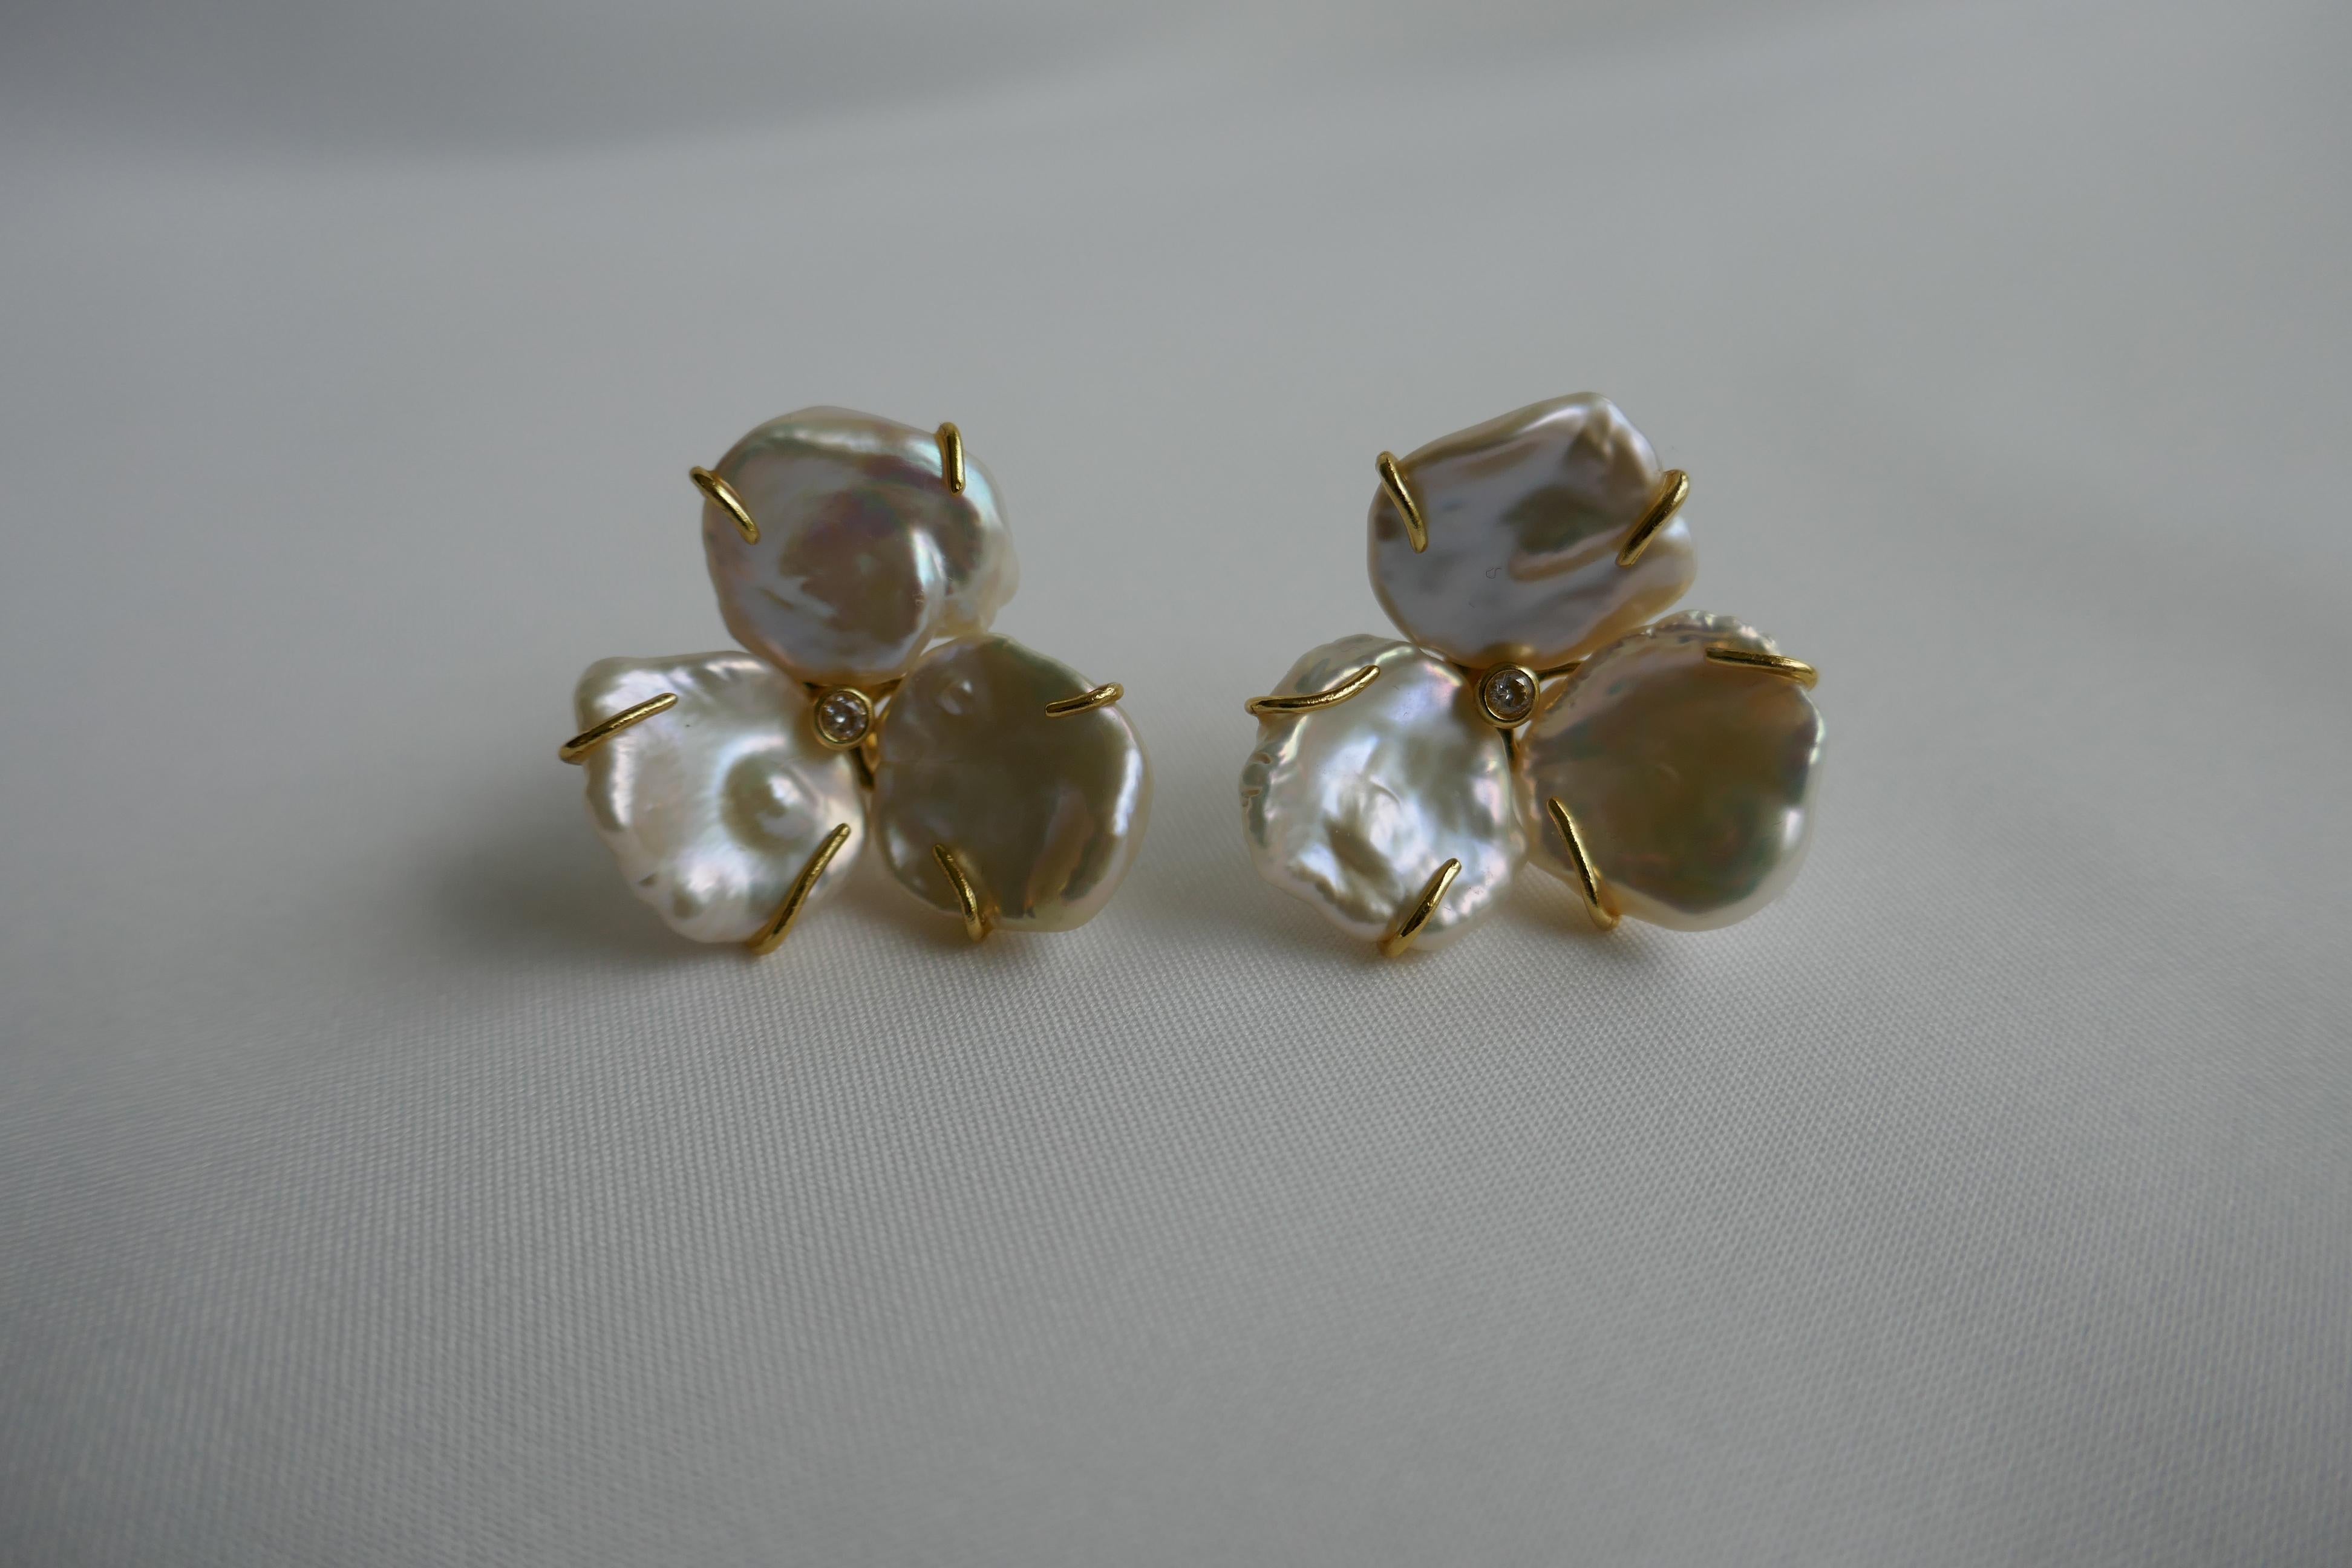 Love these earrings. Wear then for going out or casually with jeans. The earrings are made of keshi pearls made into the form of a flower on sterling silver vermeil with an omega clasp. The center stone is a cubic zirconia. The circumference of the